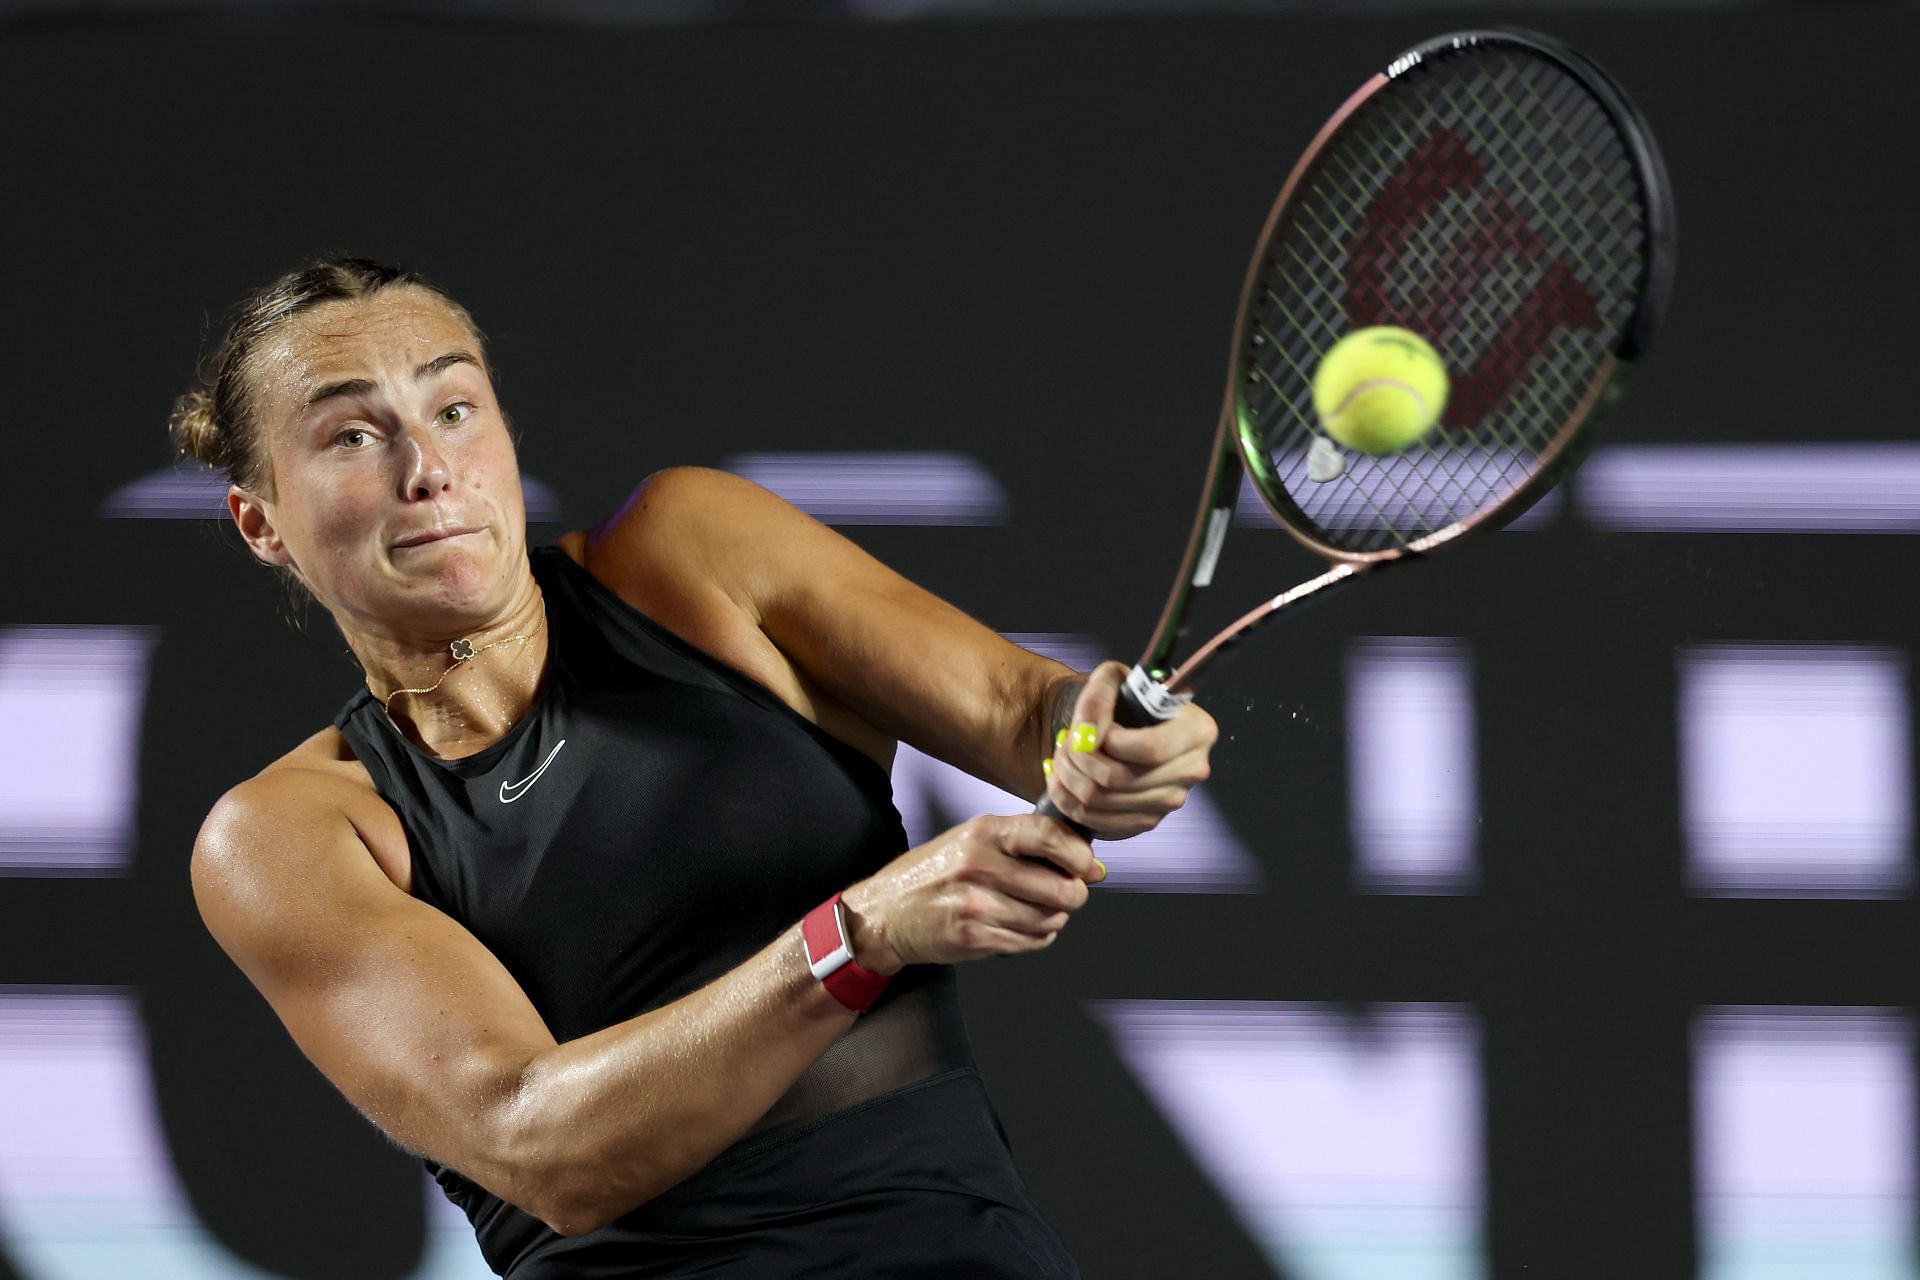 Aryna Sabalenka in action at the ATP Finals